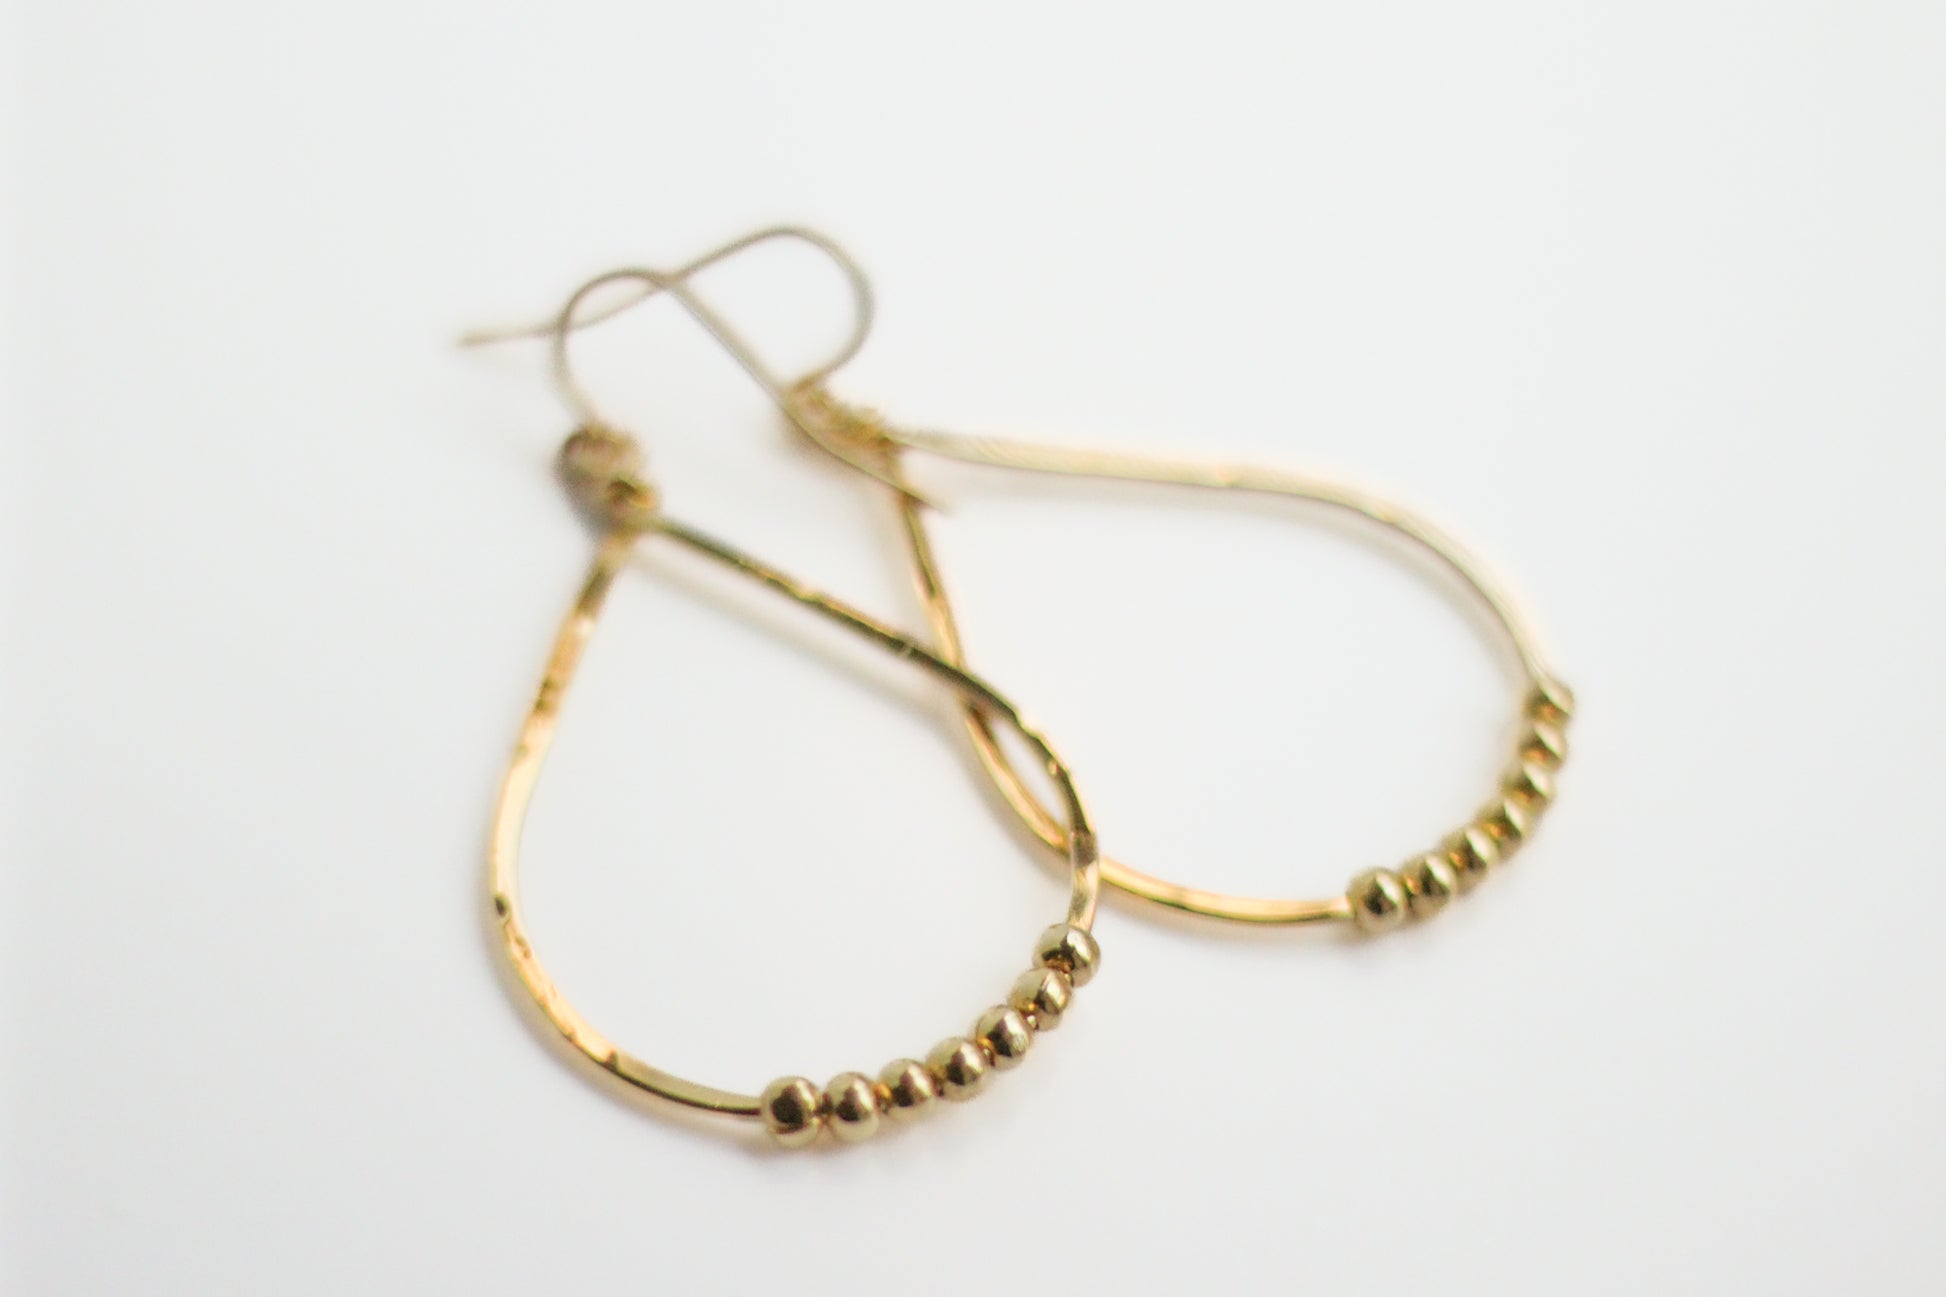 Hammered Teardrop Beads Earrings at Kadou Boutique.